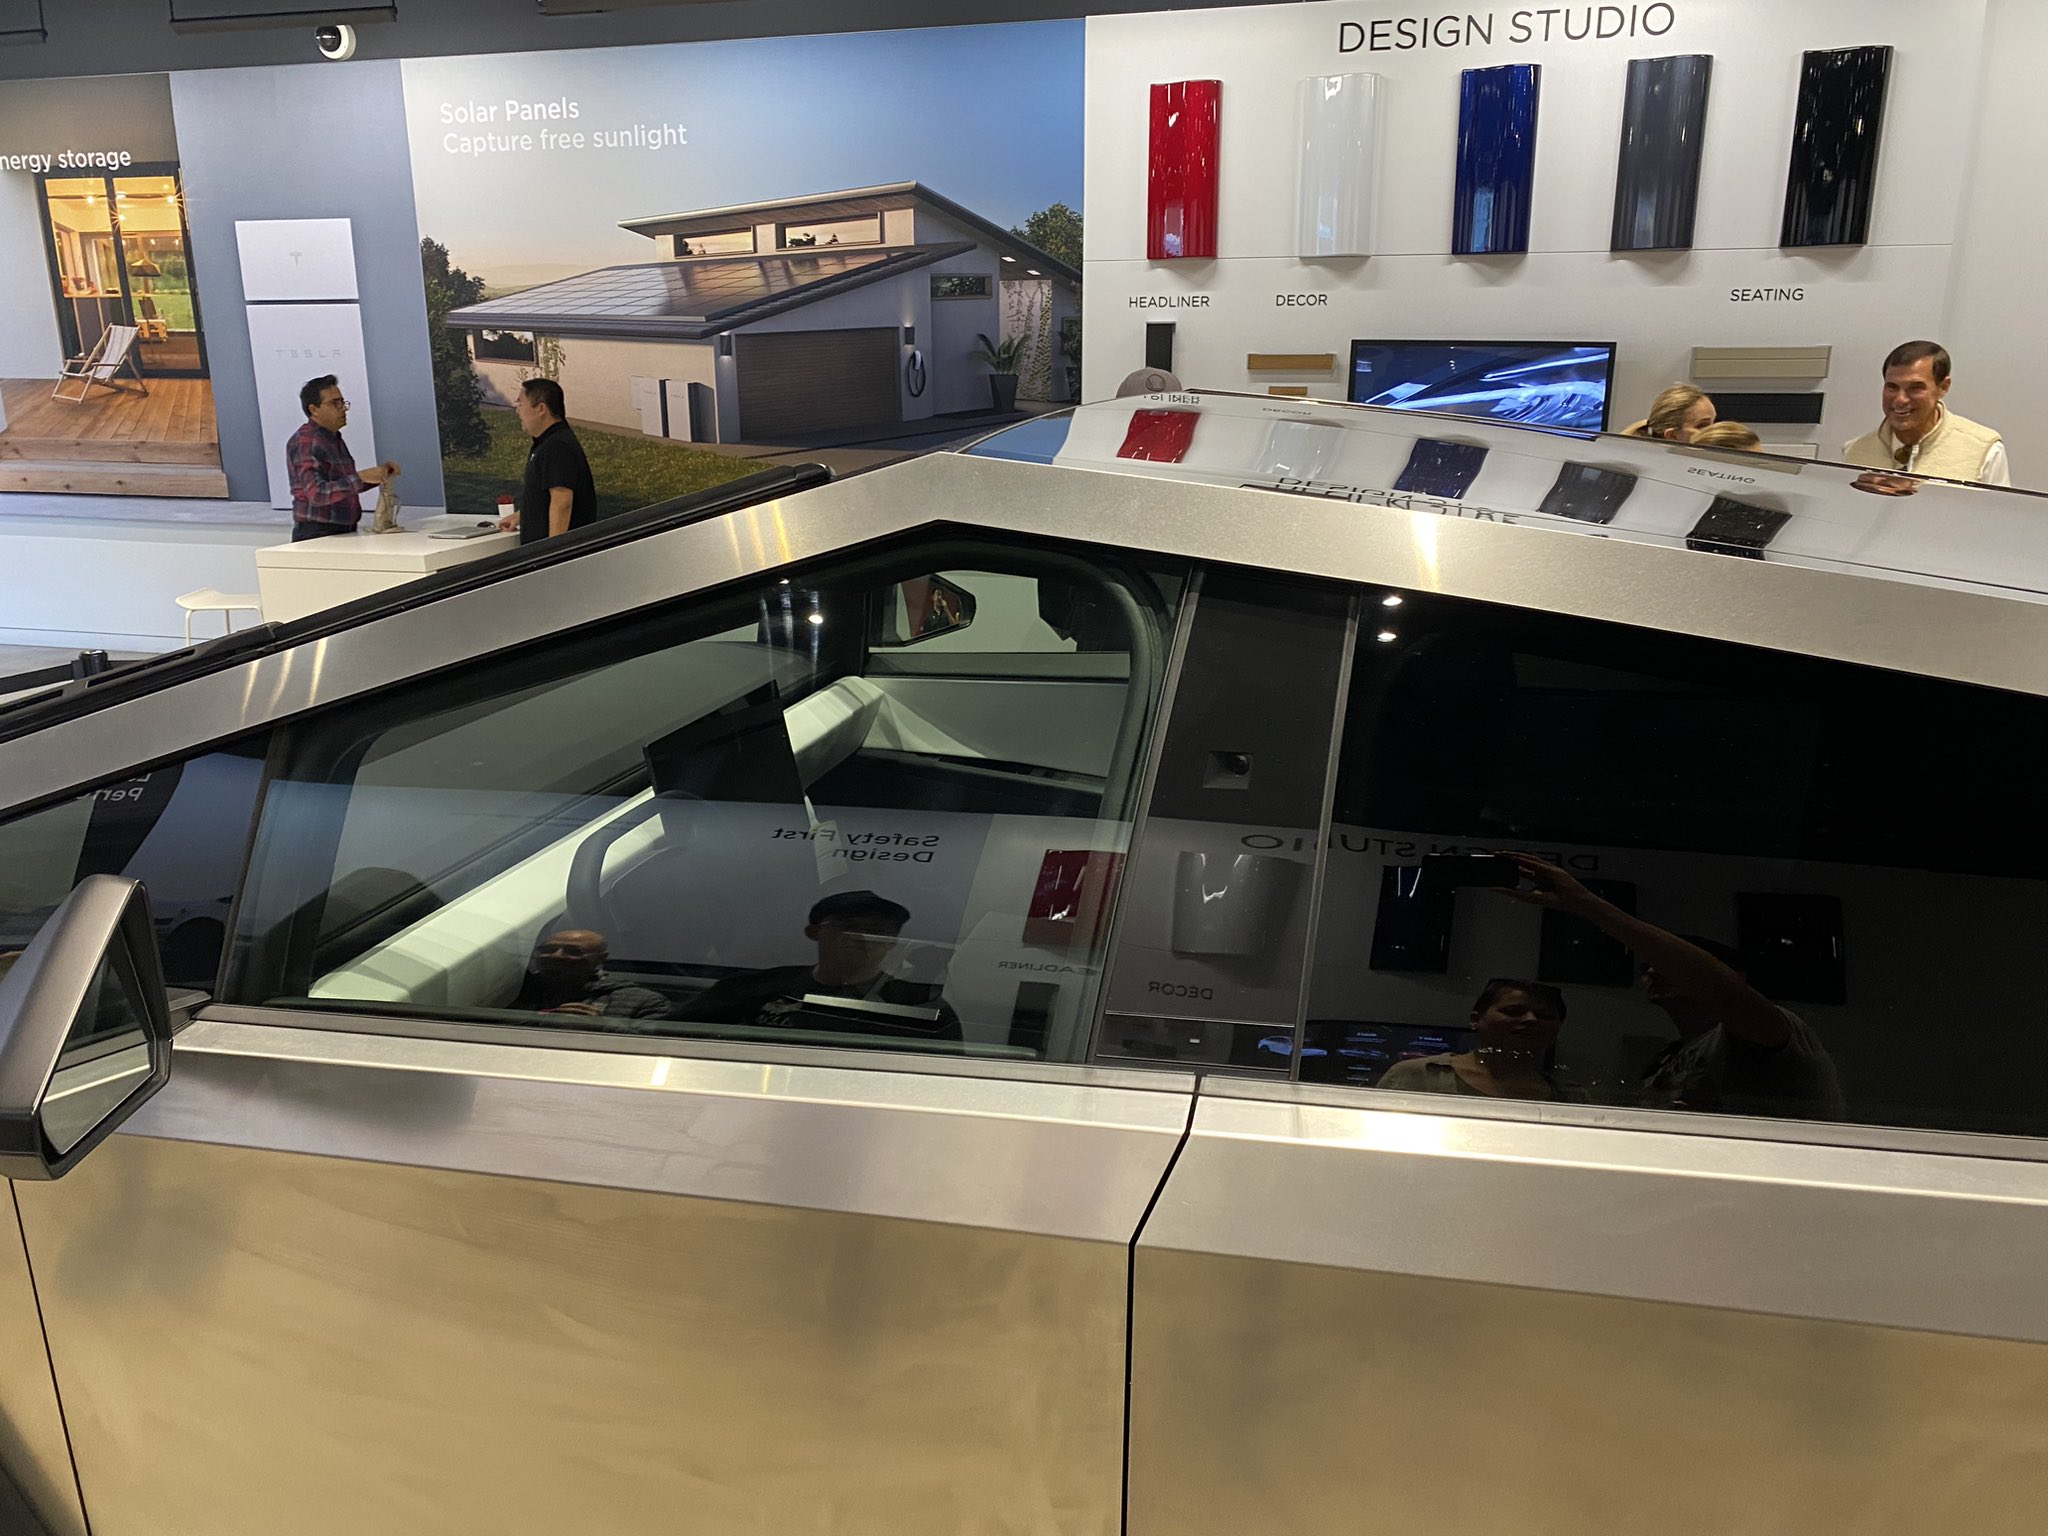 San Diego Tesla showroom now has a CyberTruck on display, and a